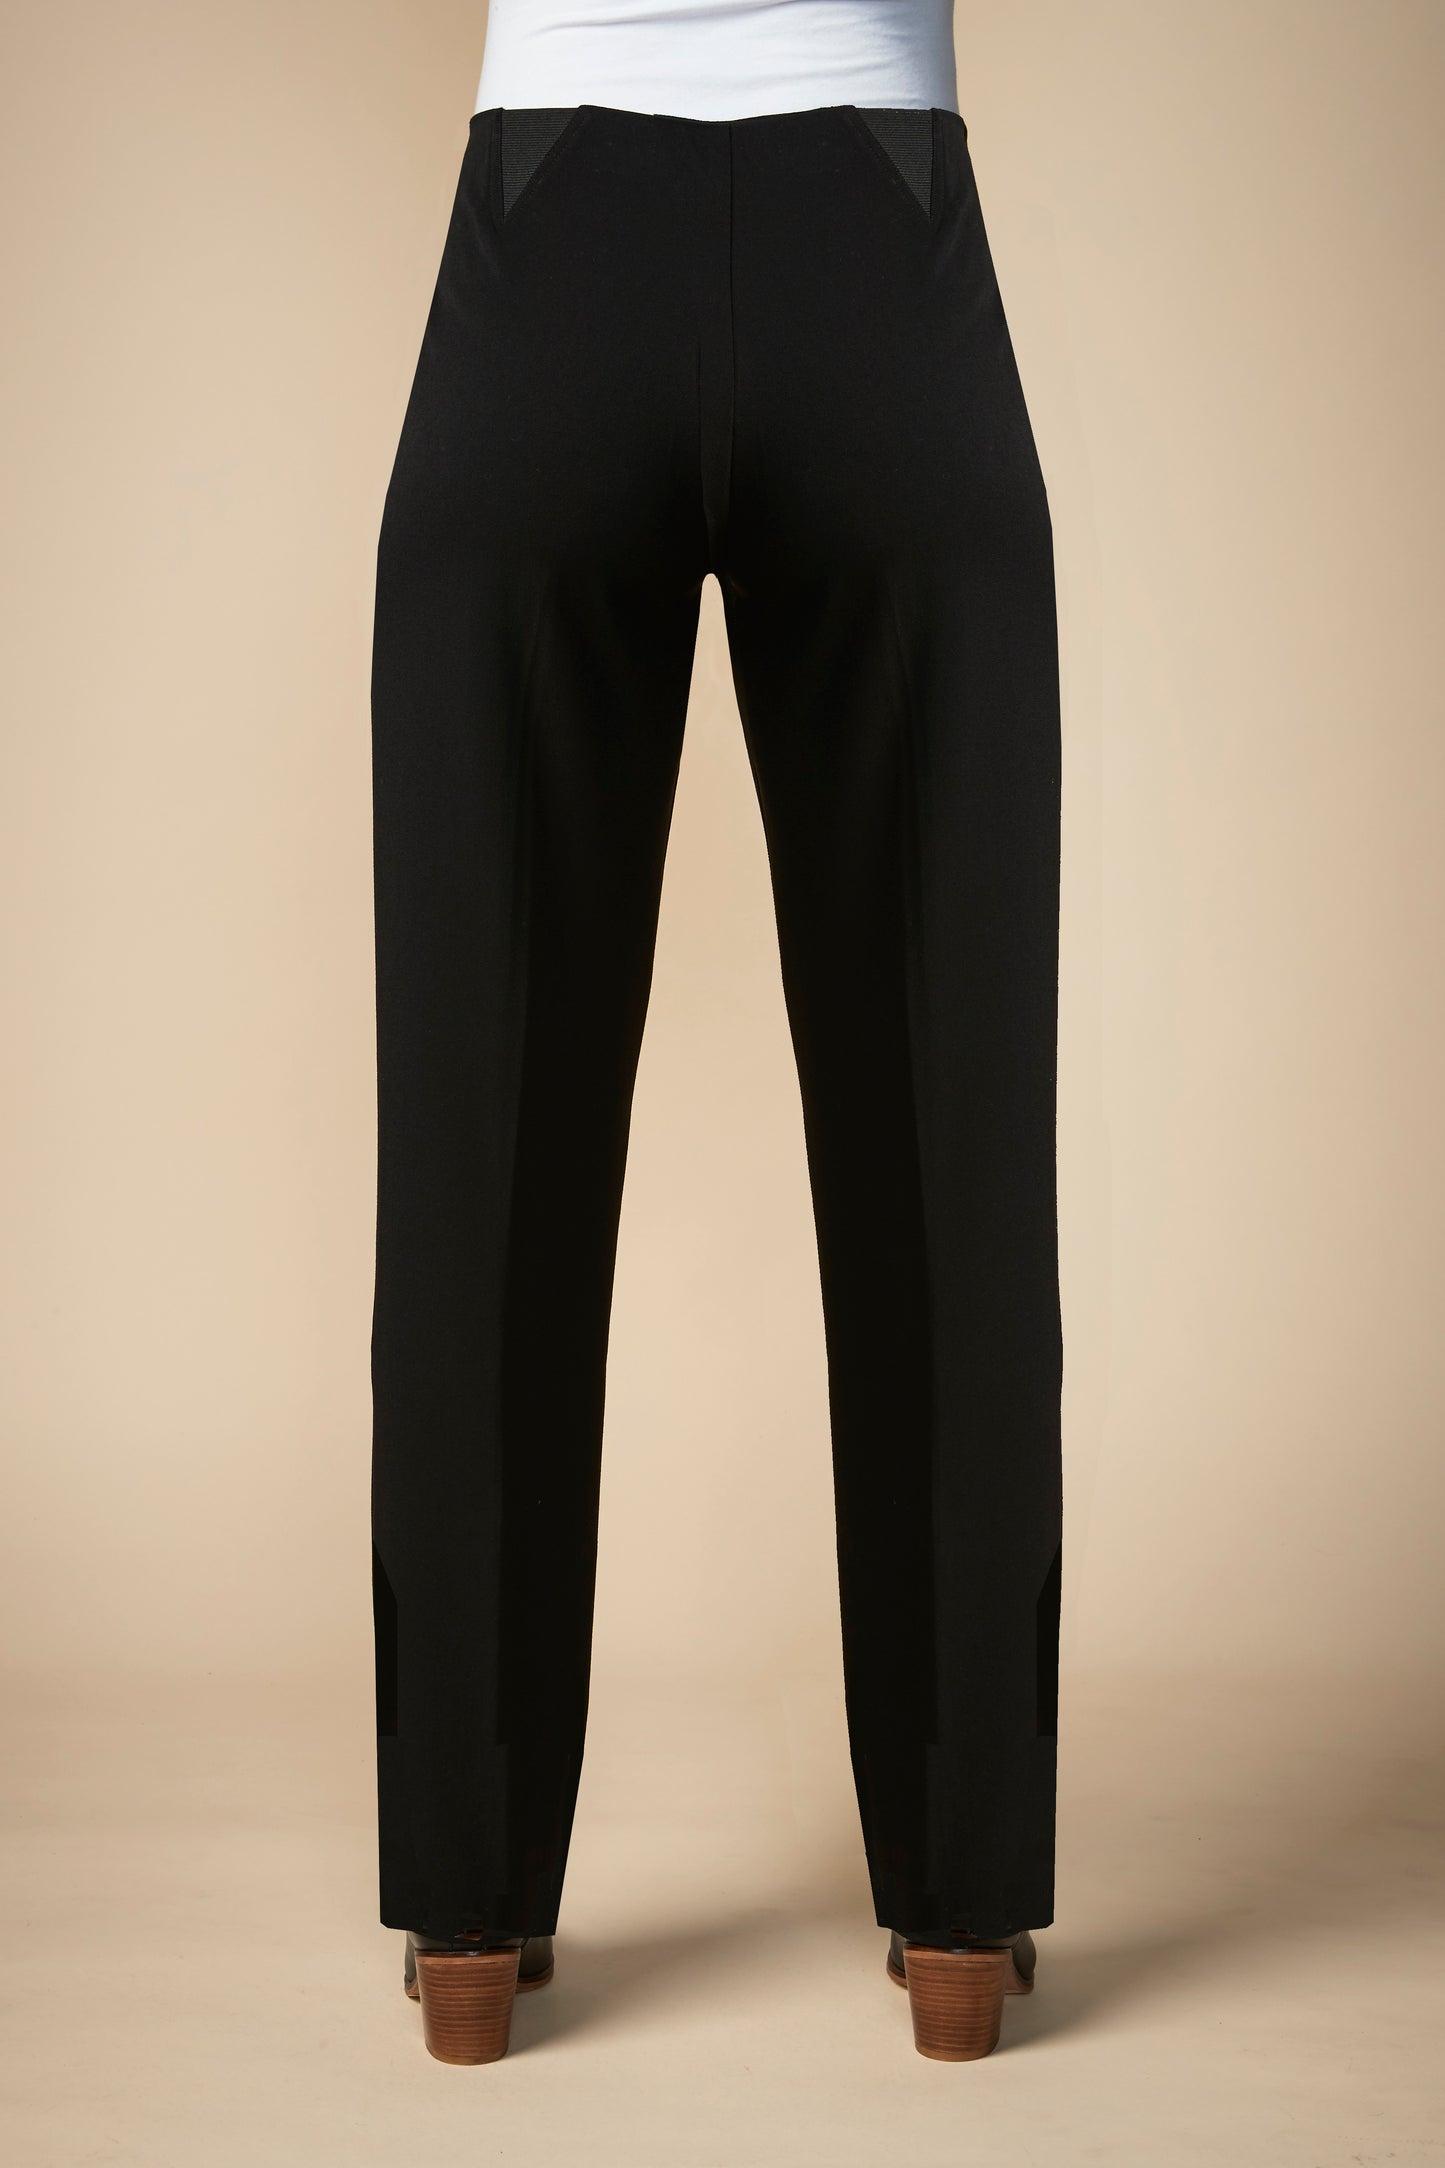 Newport - Pant - Style NP0004-2 - Black Navy Charcoal - Limited Sizes Available